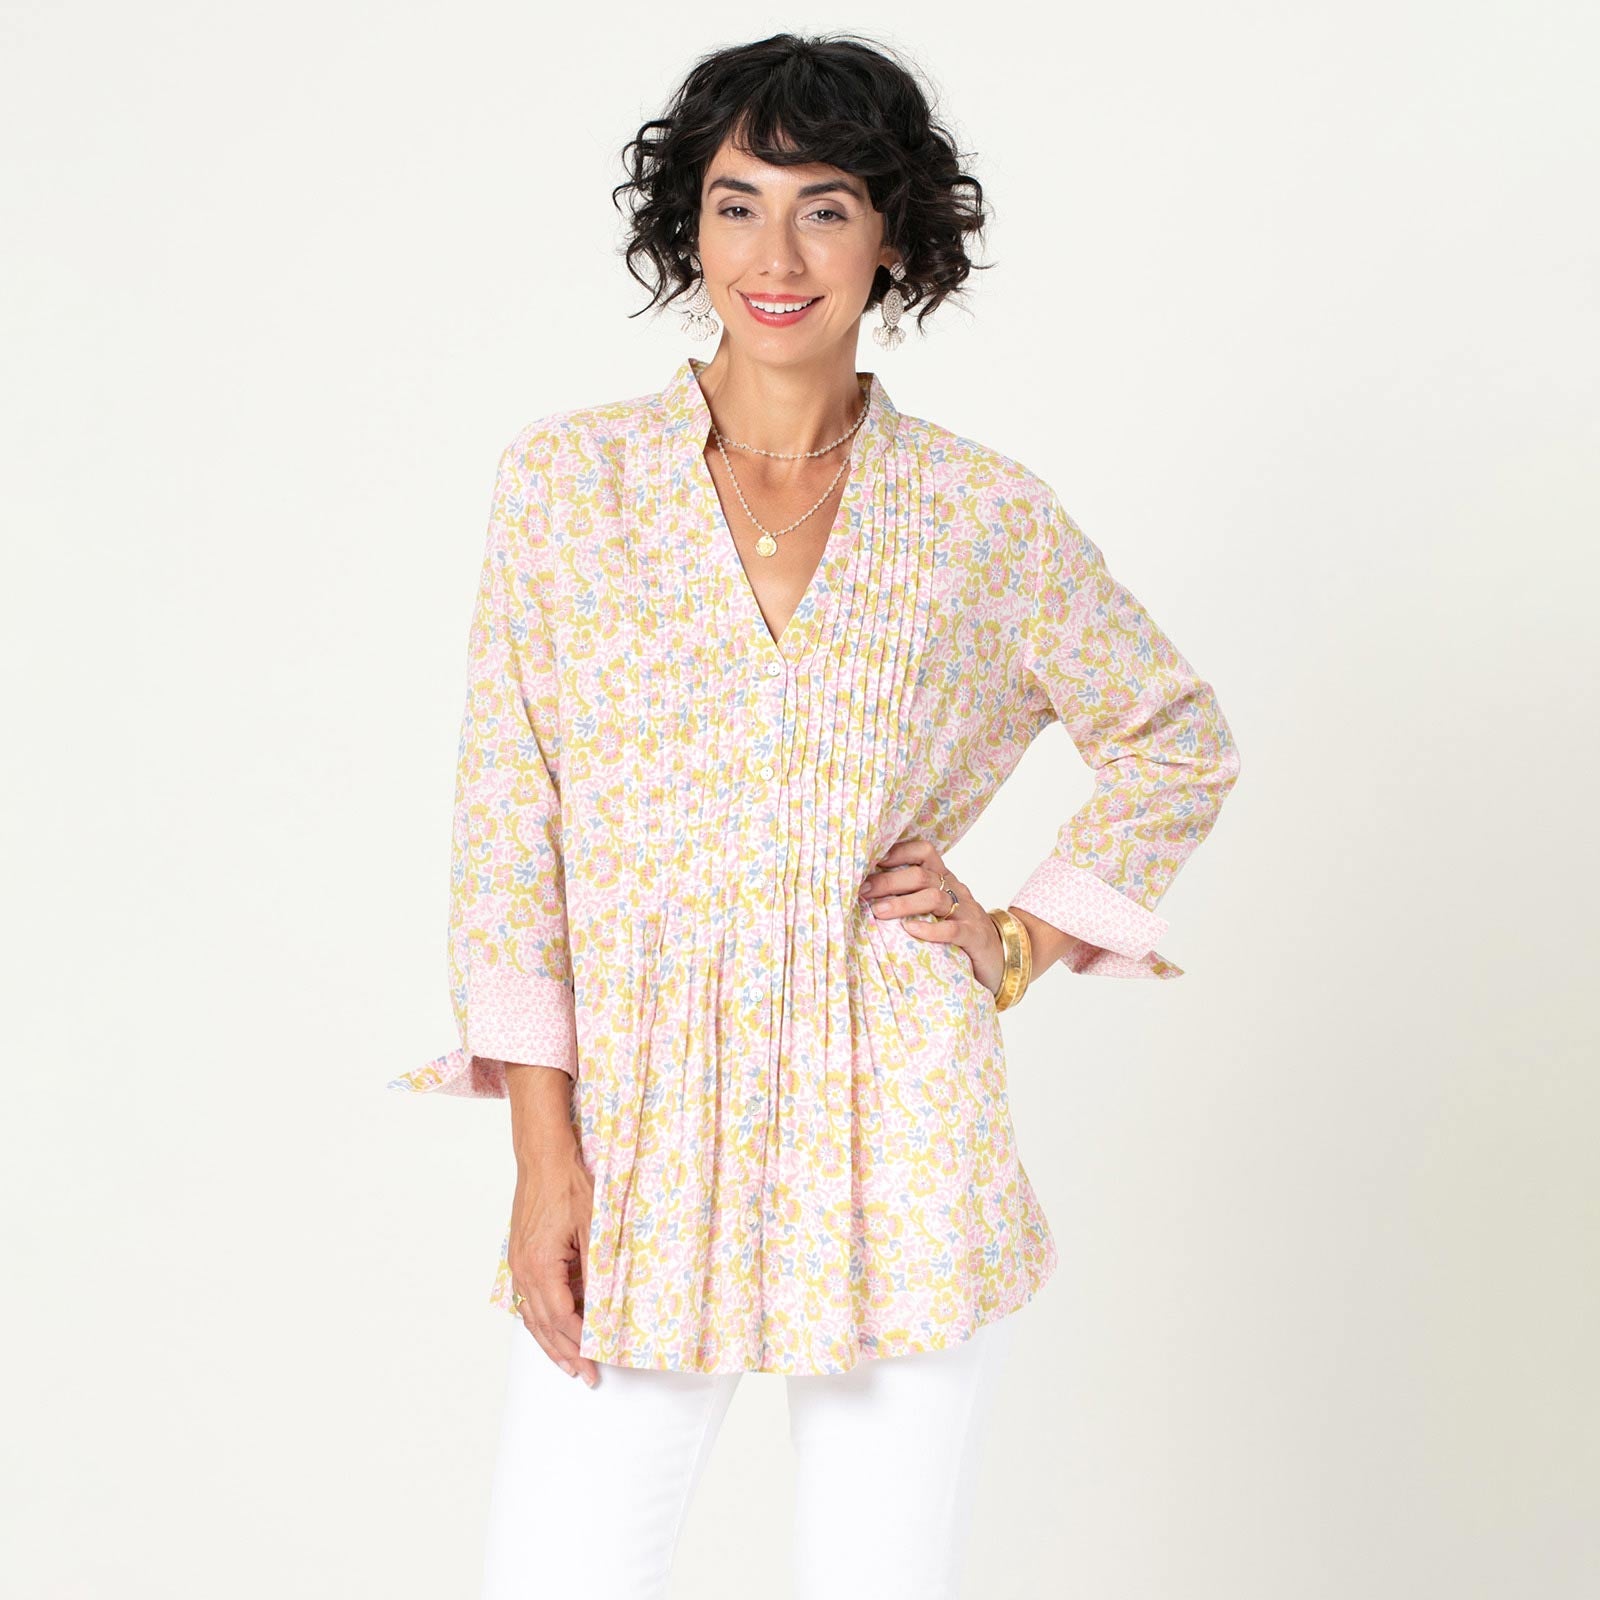 Sale: Rock Cotton Round Bottom Tunic - Size 2 / Marble Pink